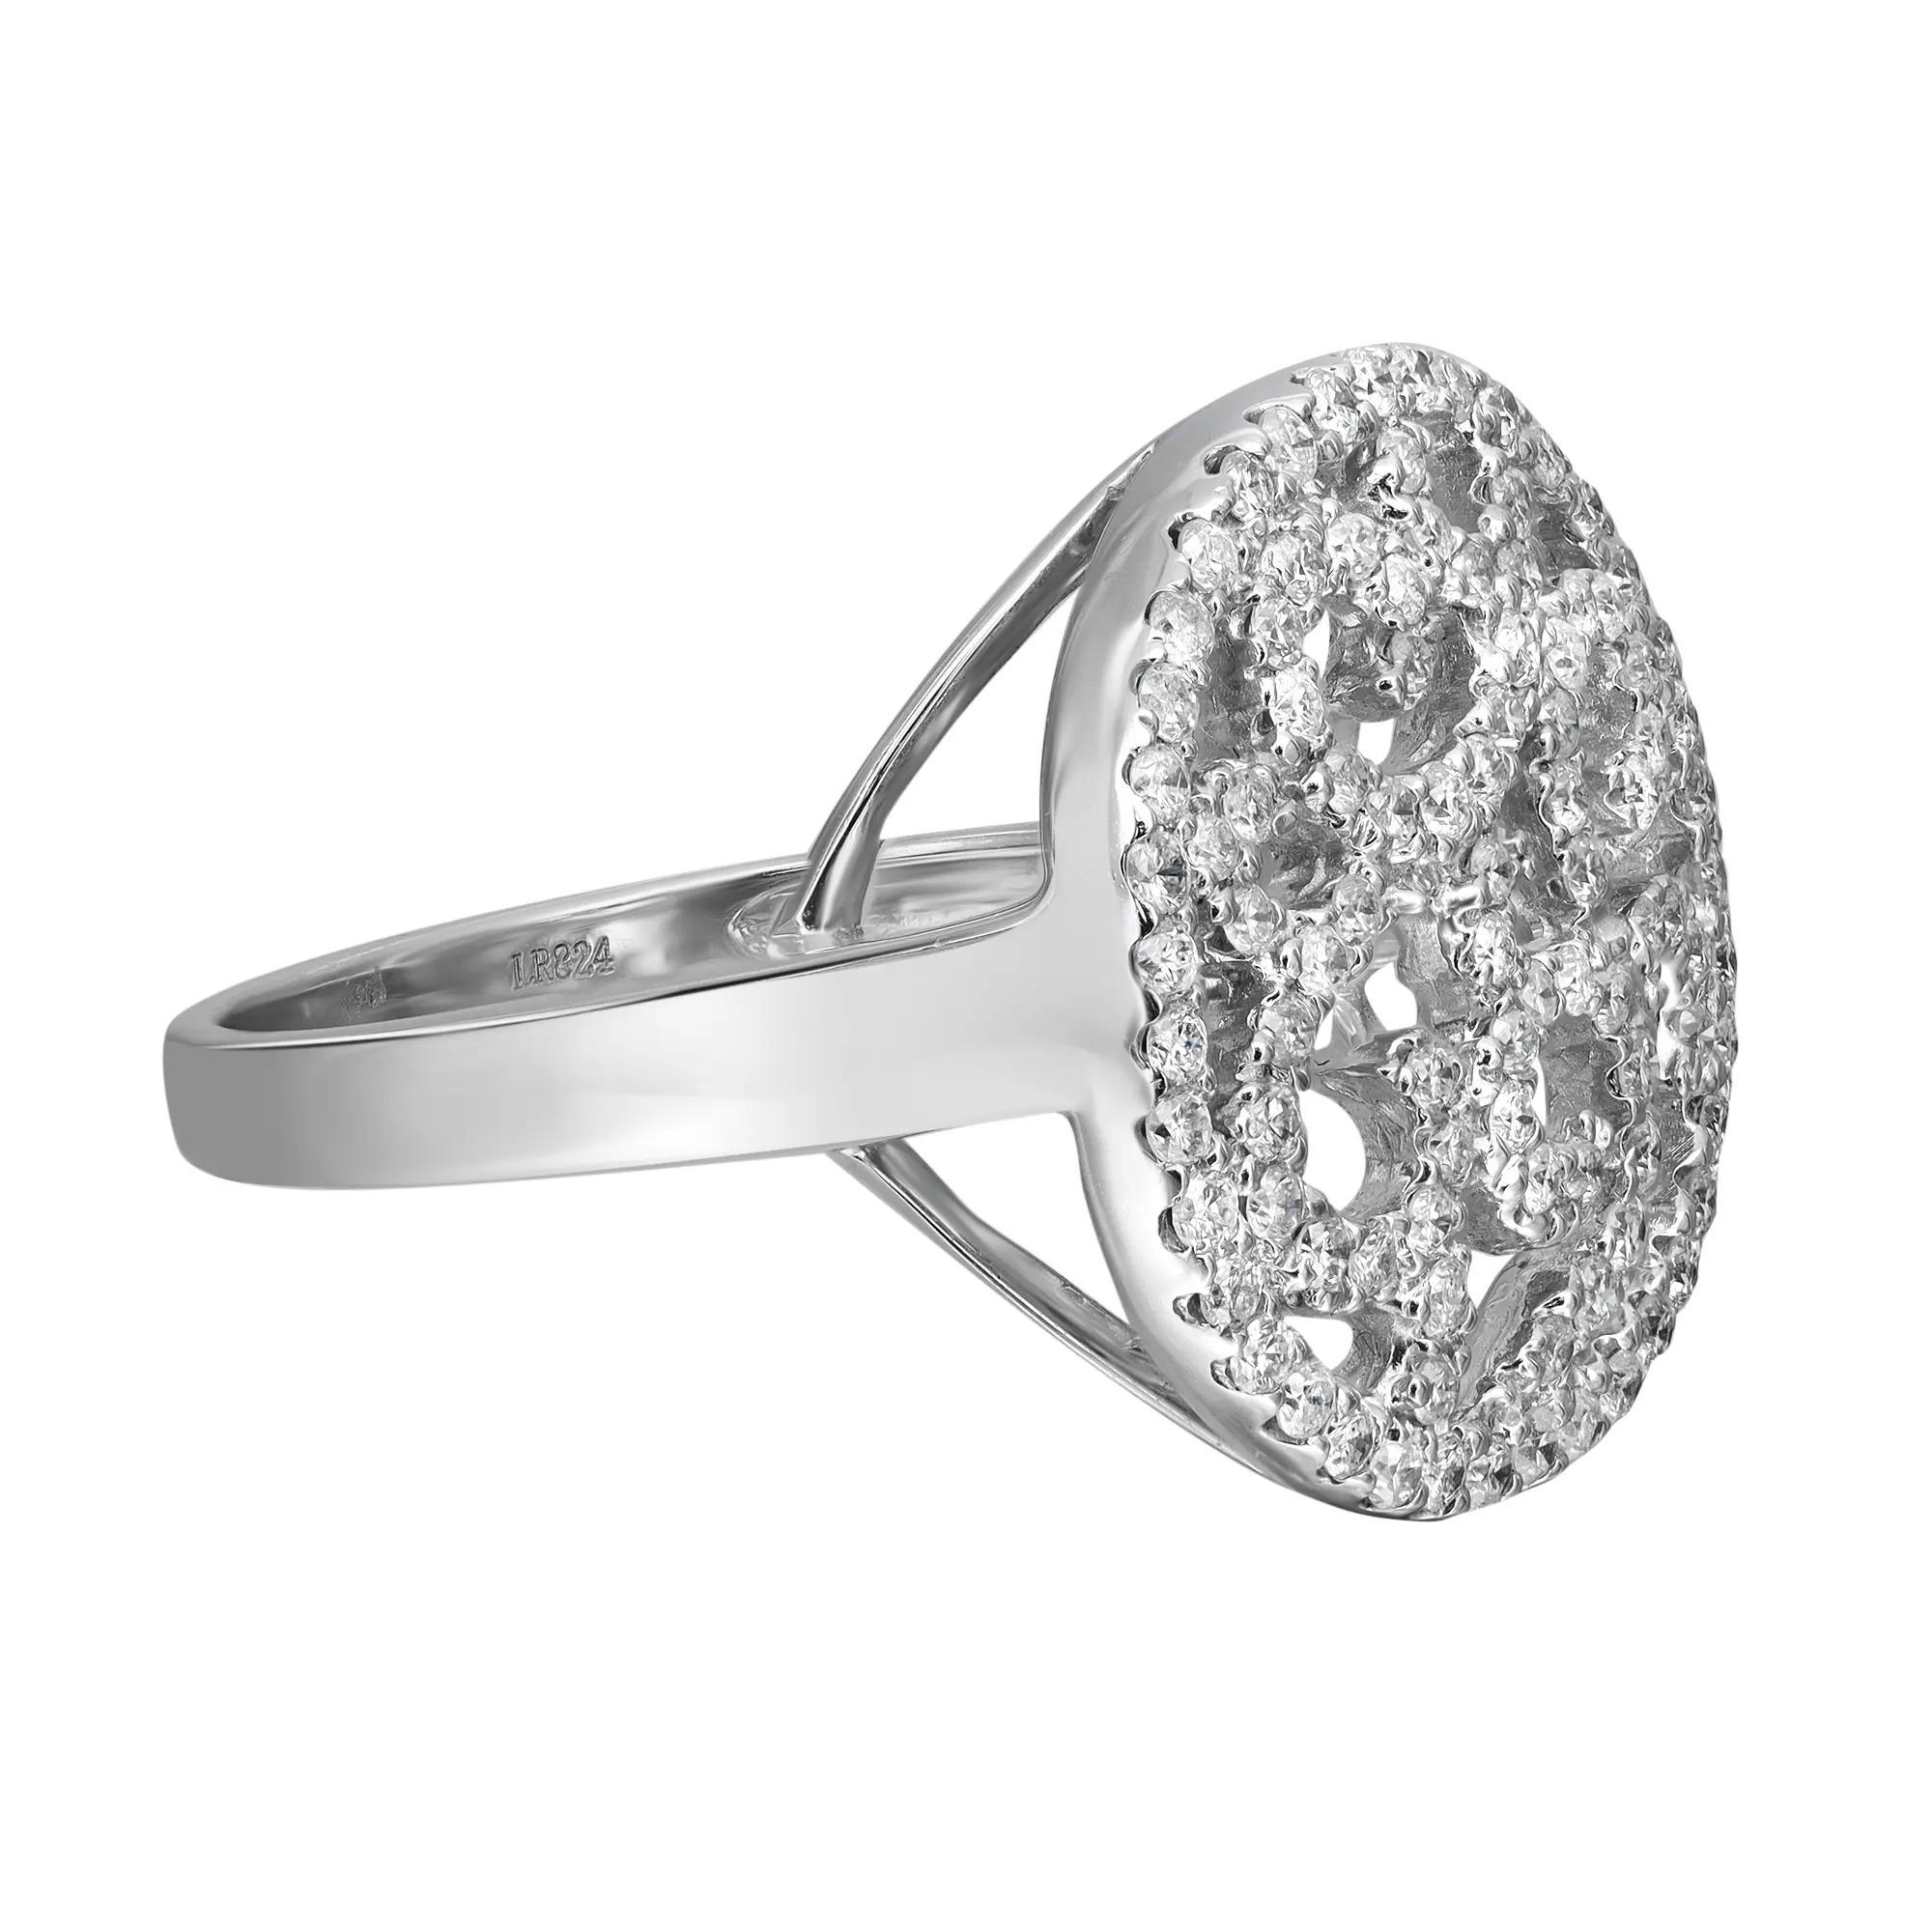 Modern 0.76cttw Prong Set Round Diamond Circular Cocktail Ring 14k White Gold Size 7.5 For Sale